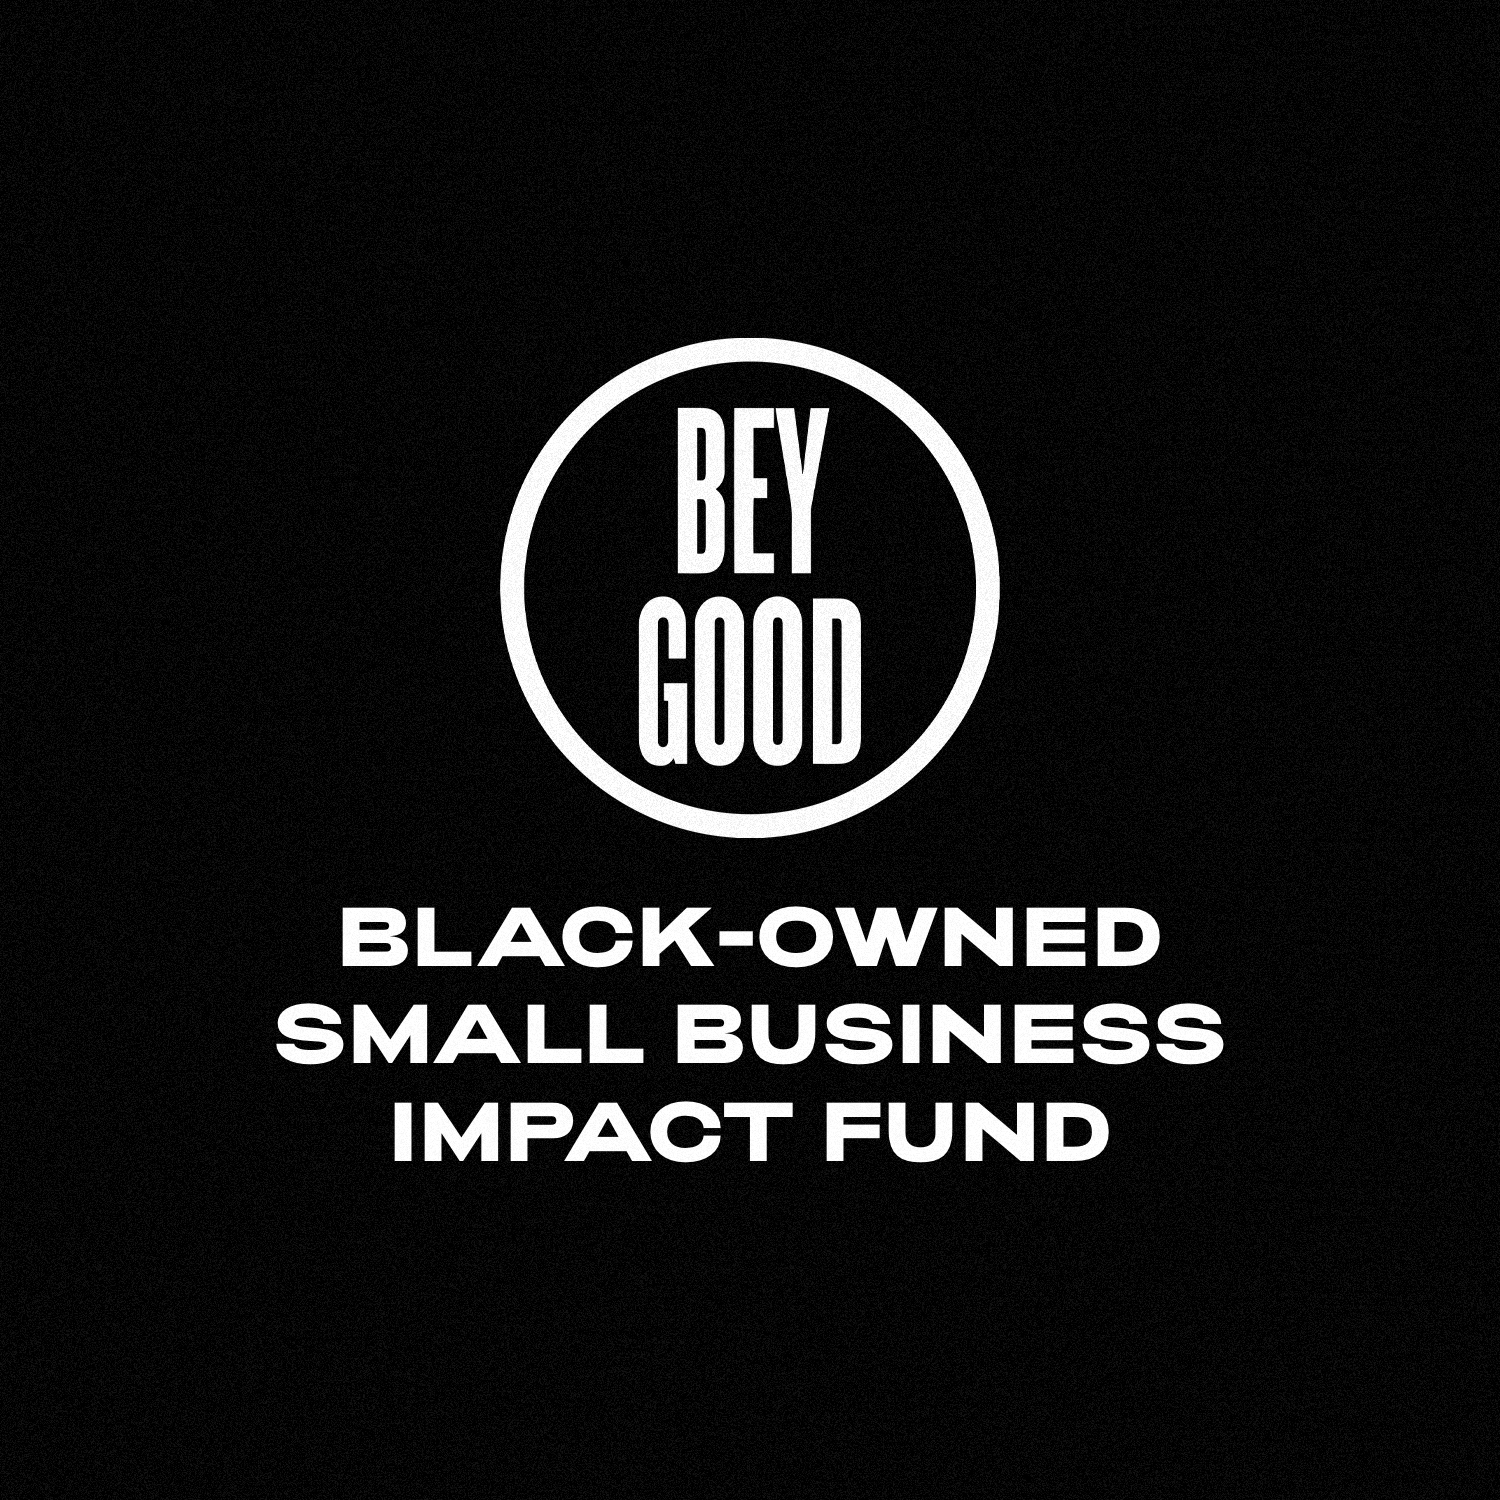 NAACP x BeyGOOD: Black Owned Small Business Impact Fund